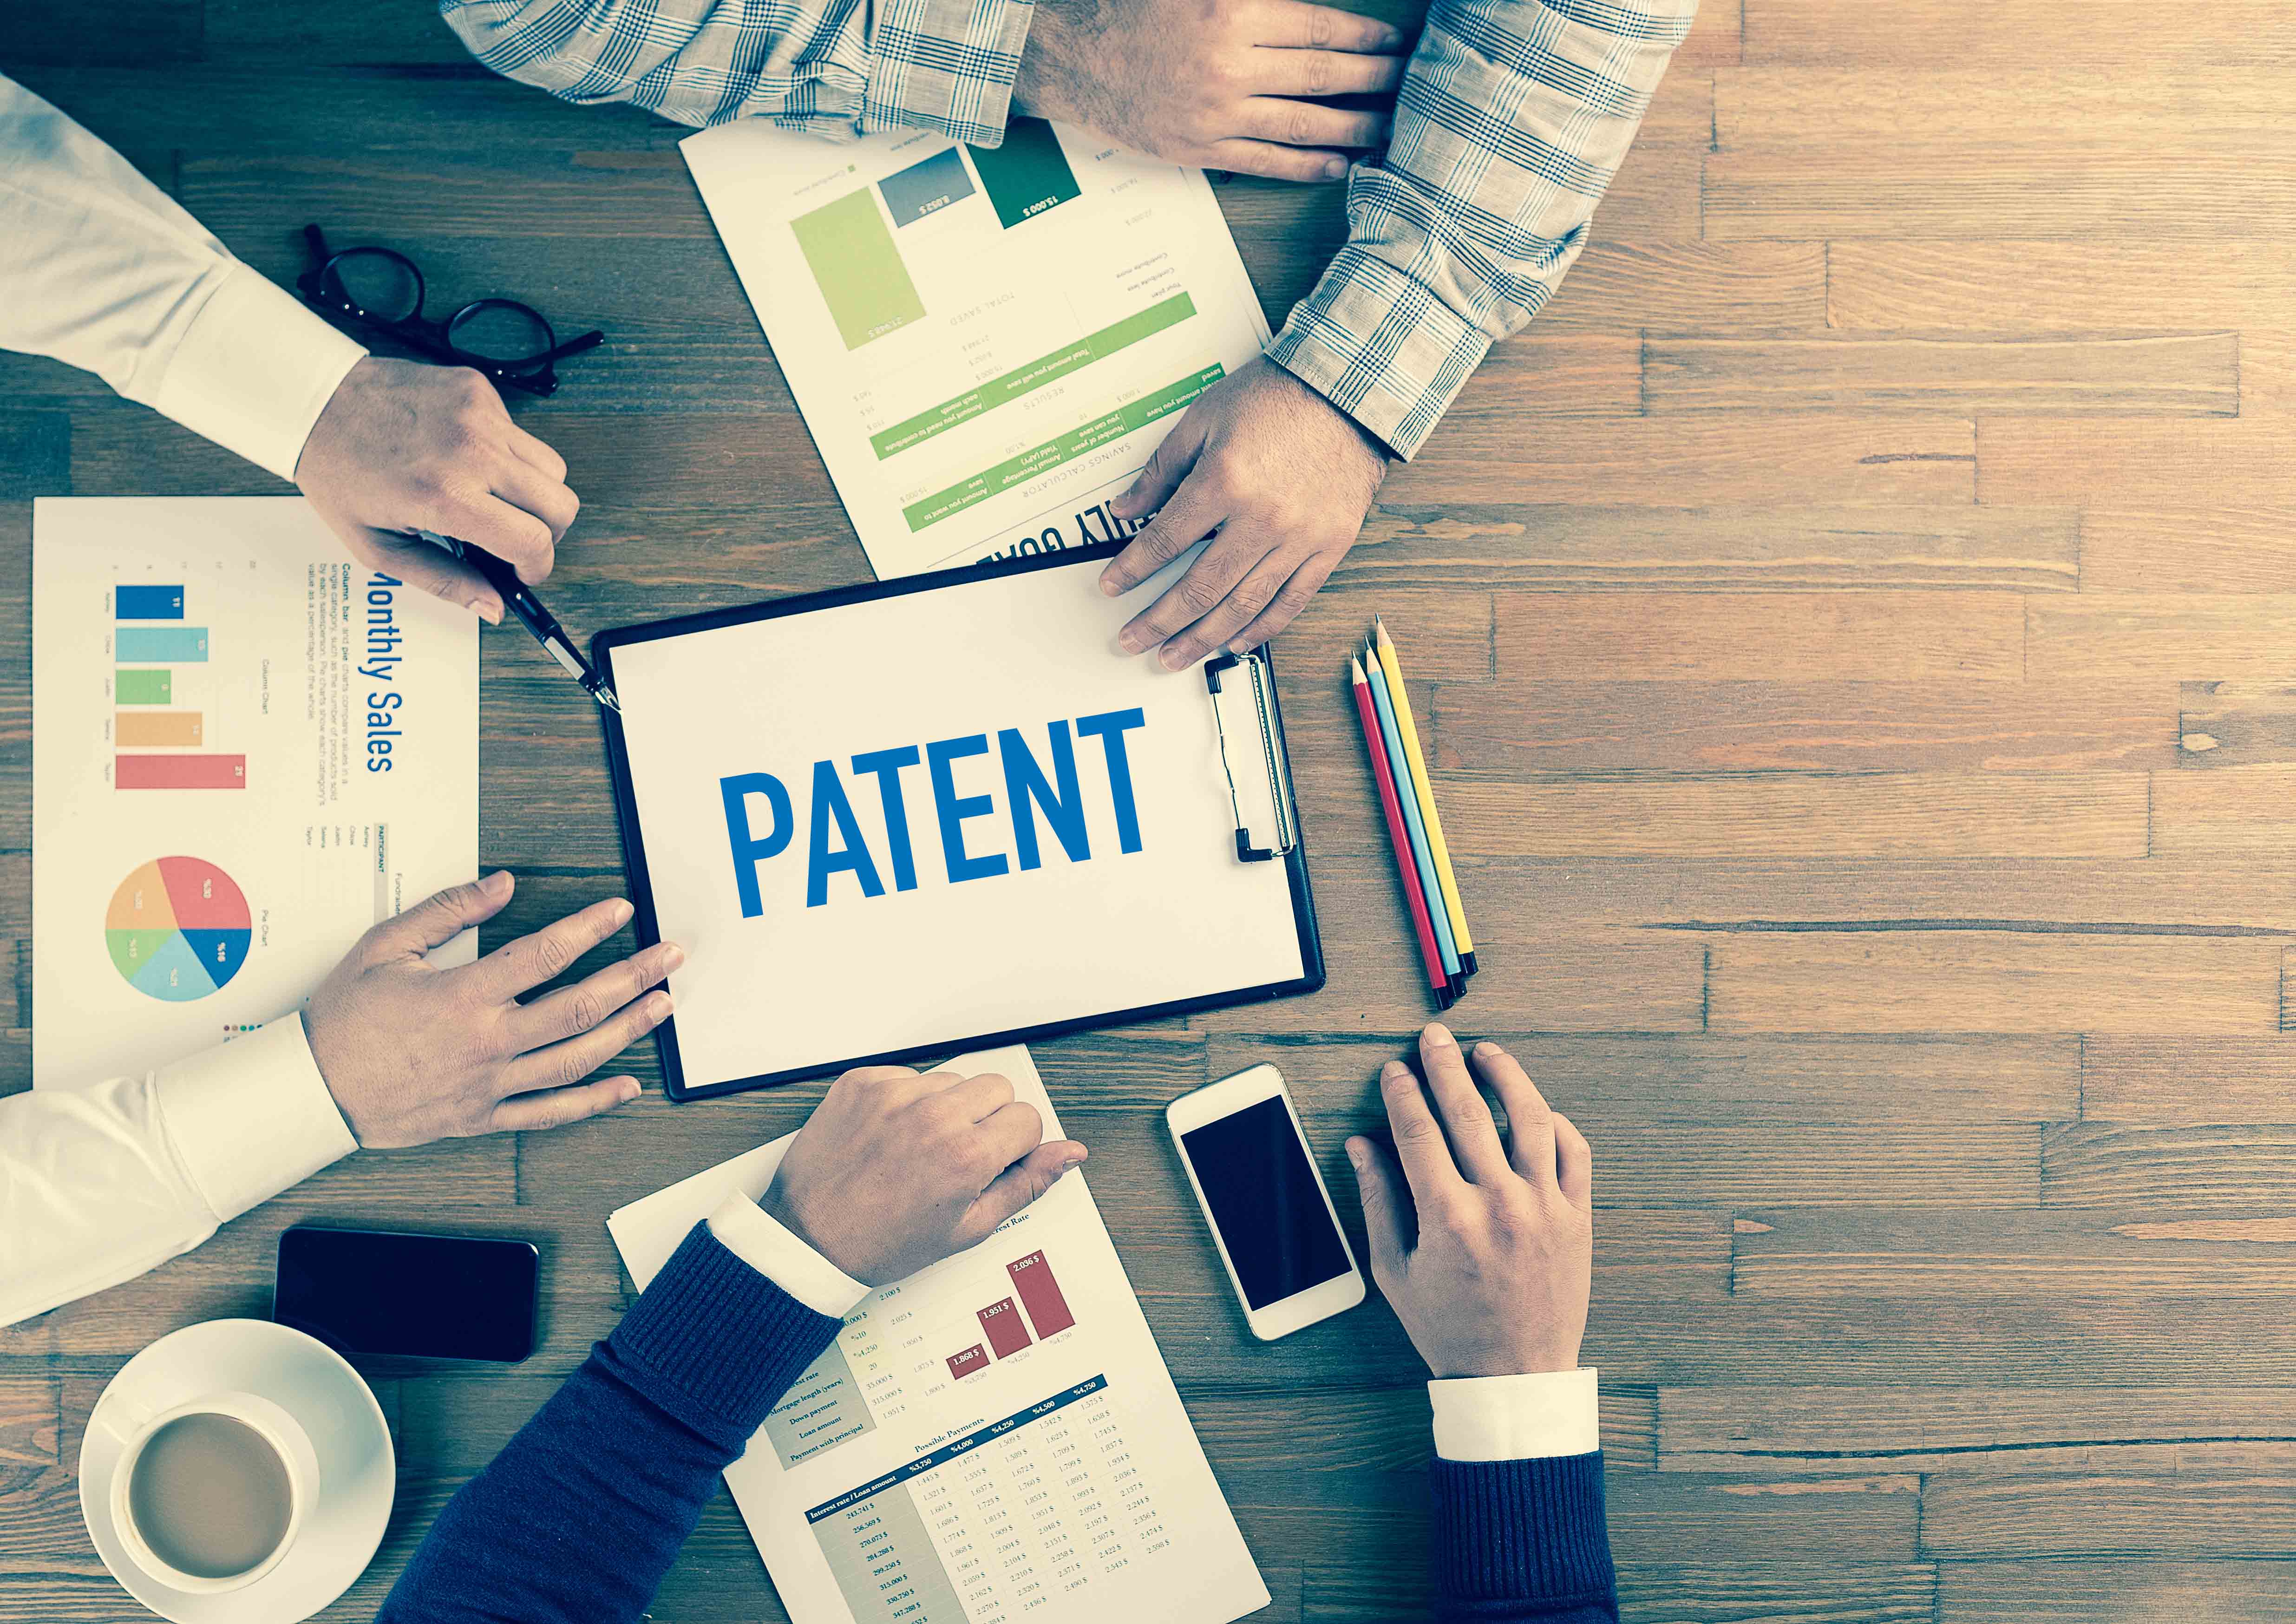 Why are patents important?